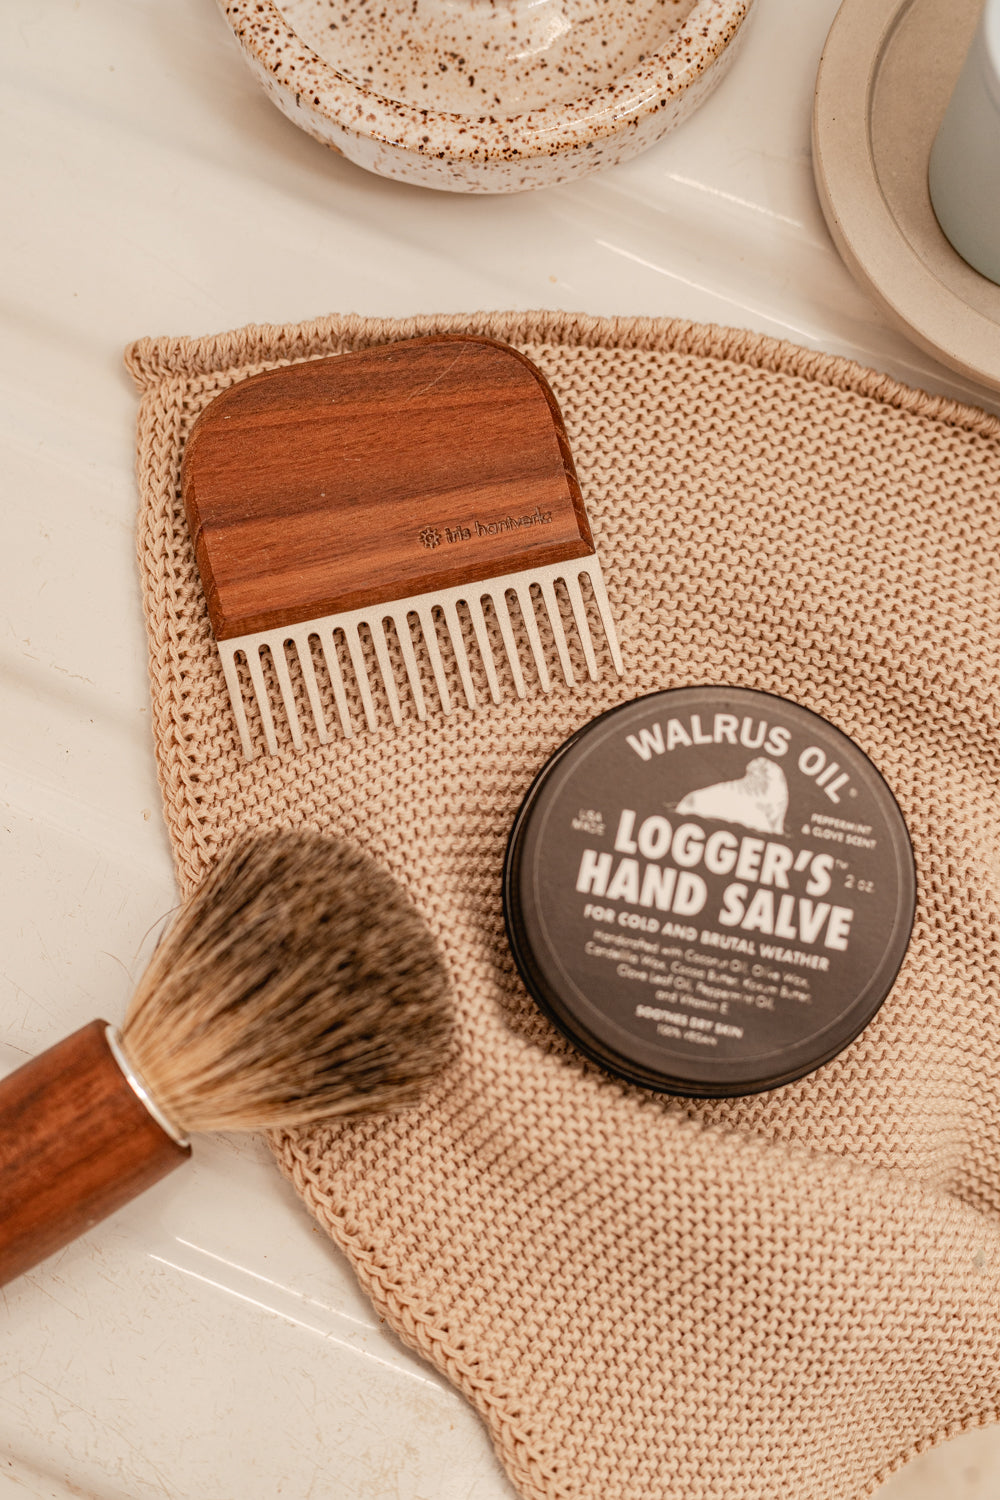 Tin of logger's hand salve pictured with beard comb and shaving cream brush